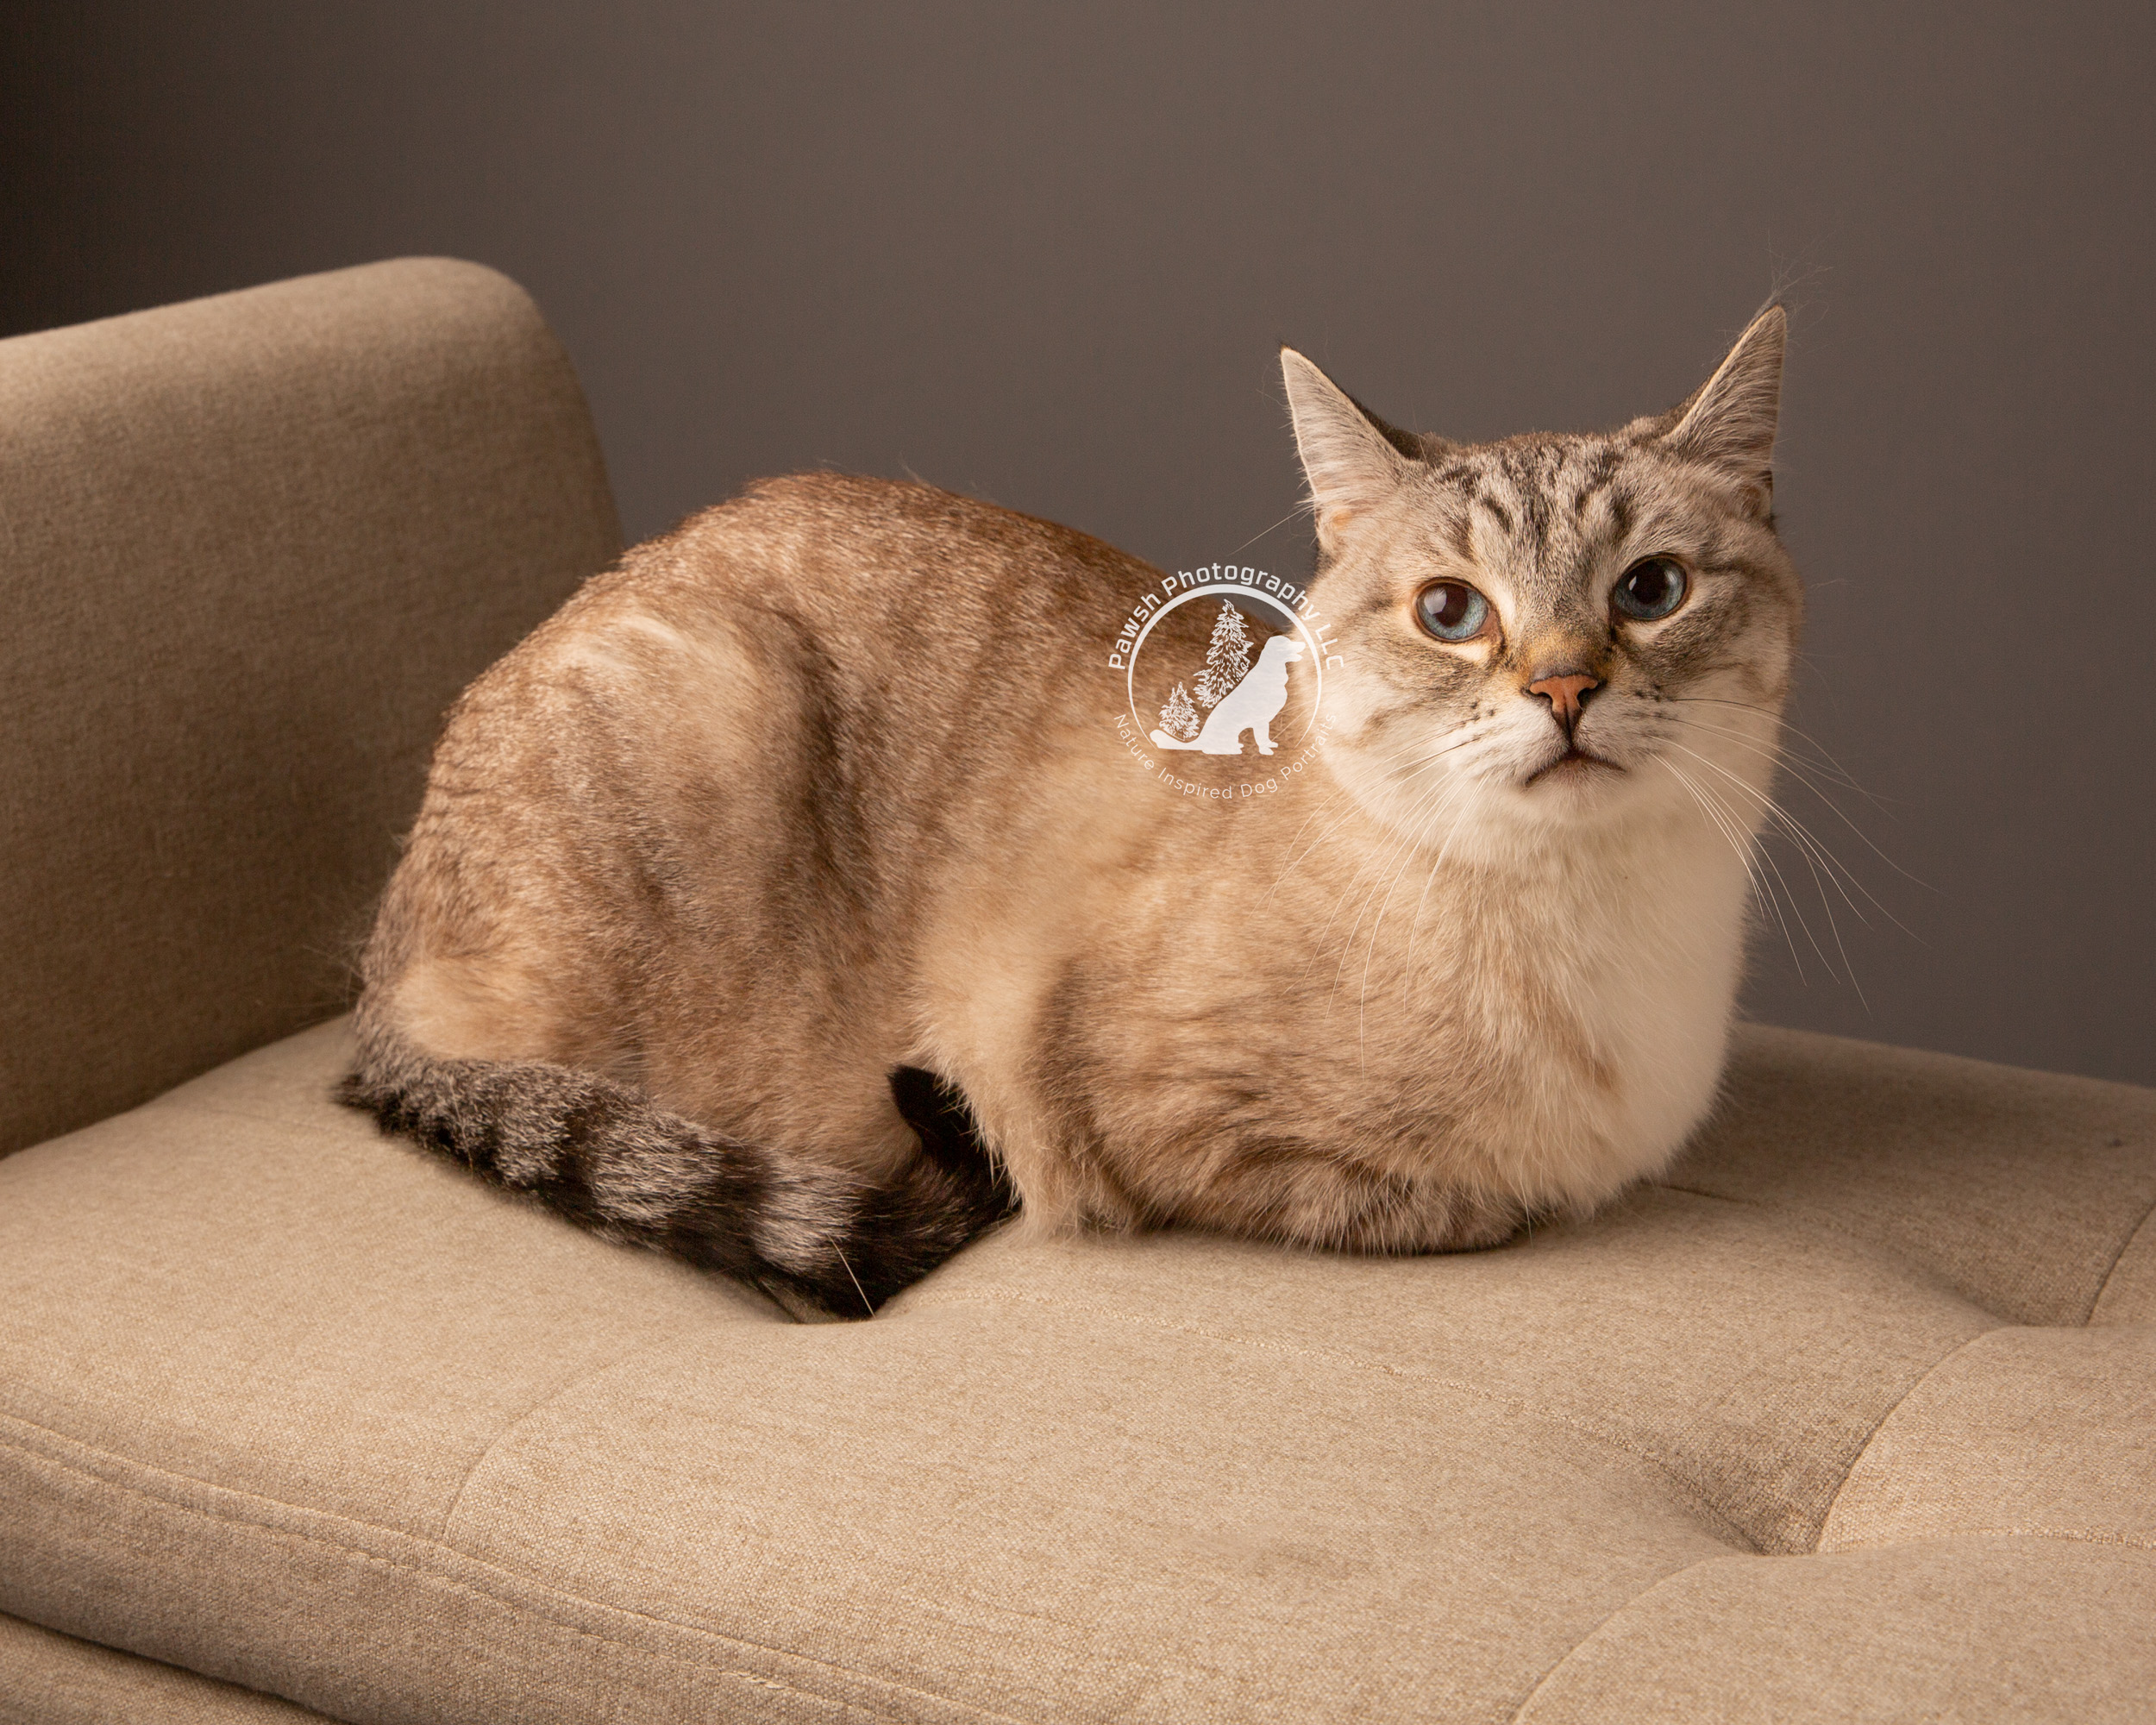 lynx point Siamese cat on a tan couch against a gray background